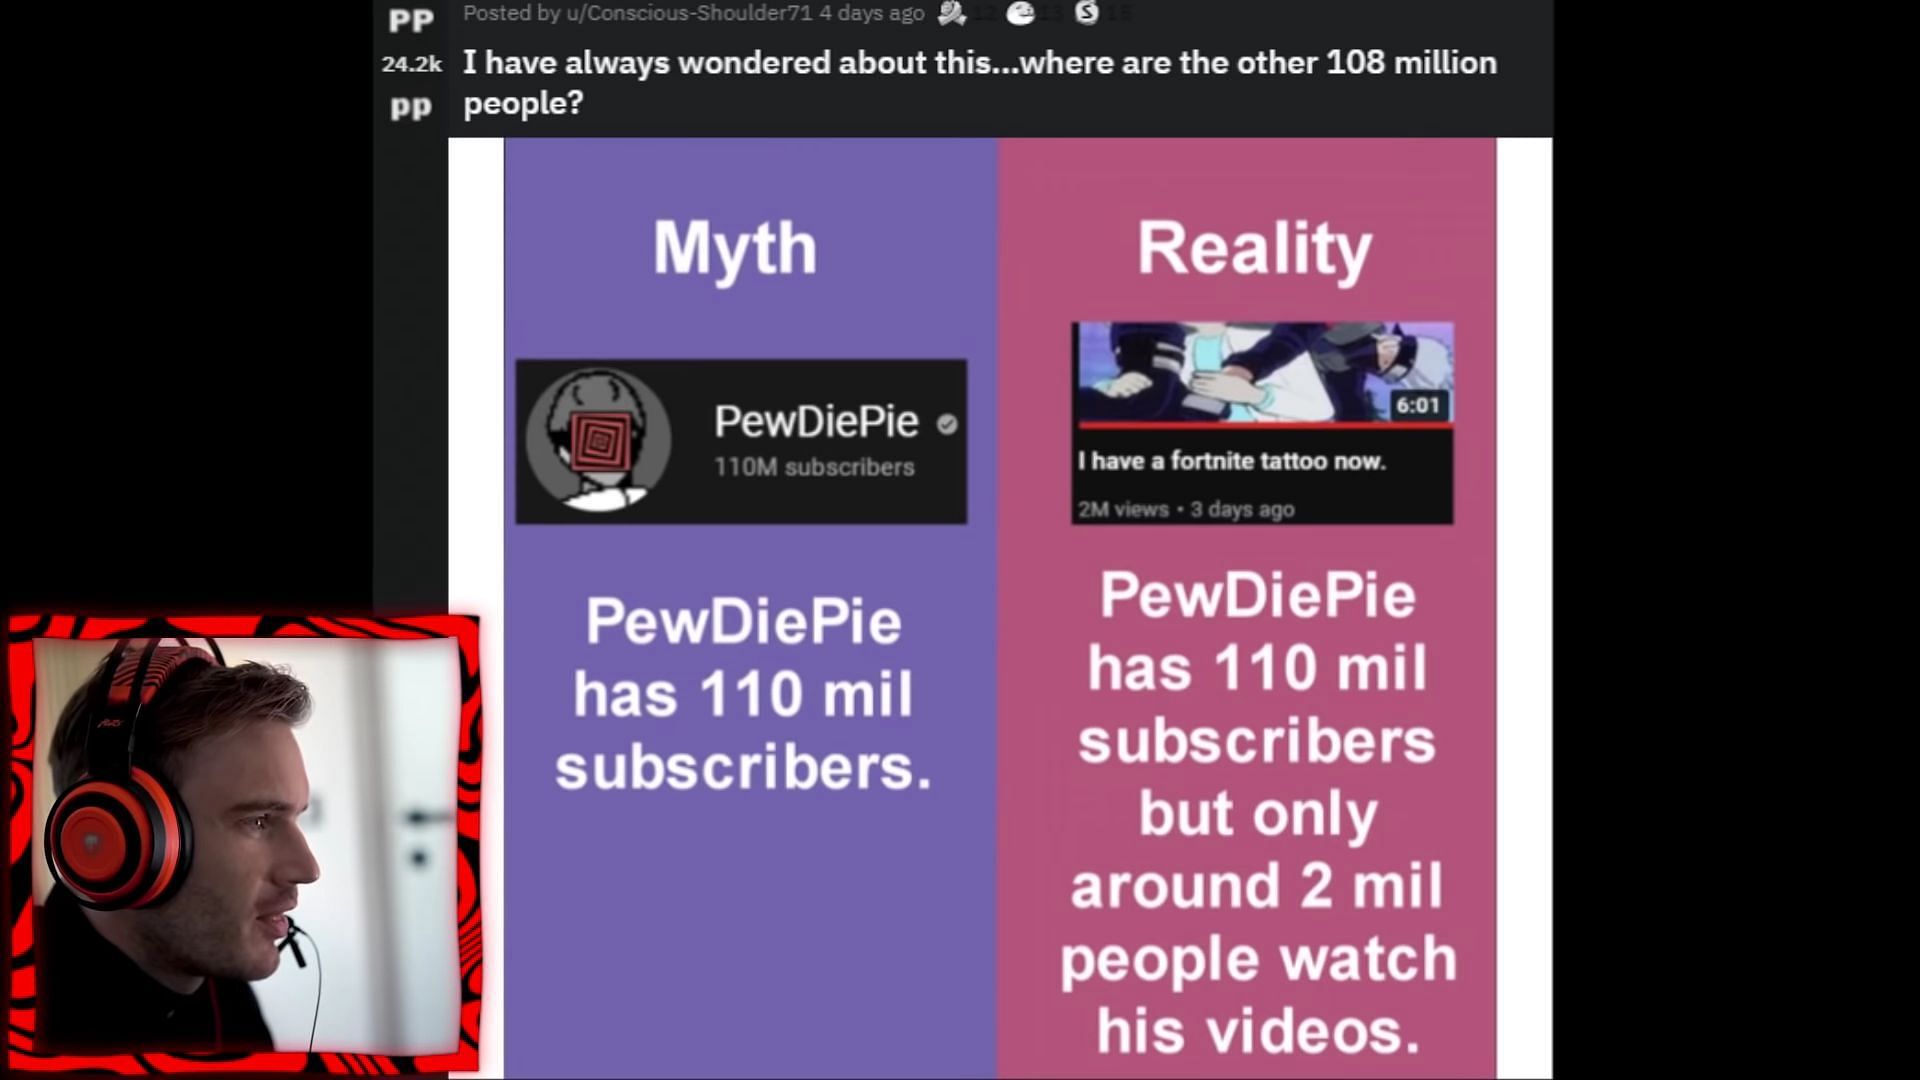 A concerned fan pointed out that PewDiePie's views have gone down (Image via PewDiePie on YouTube)